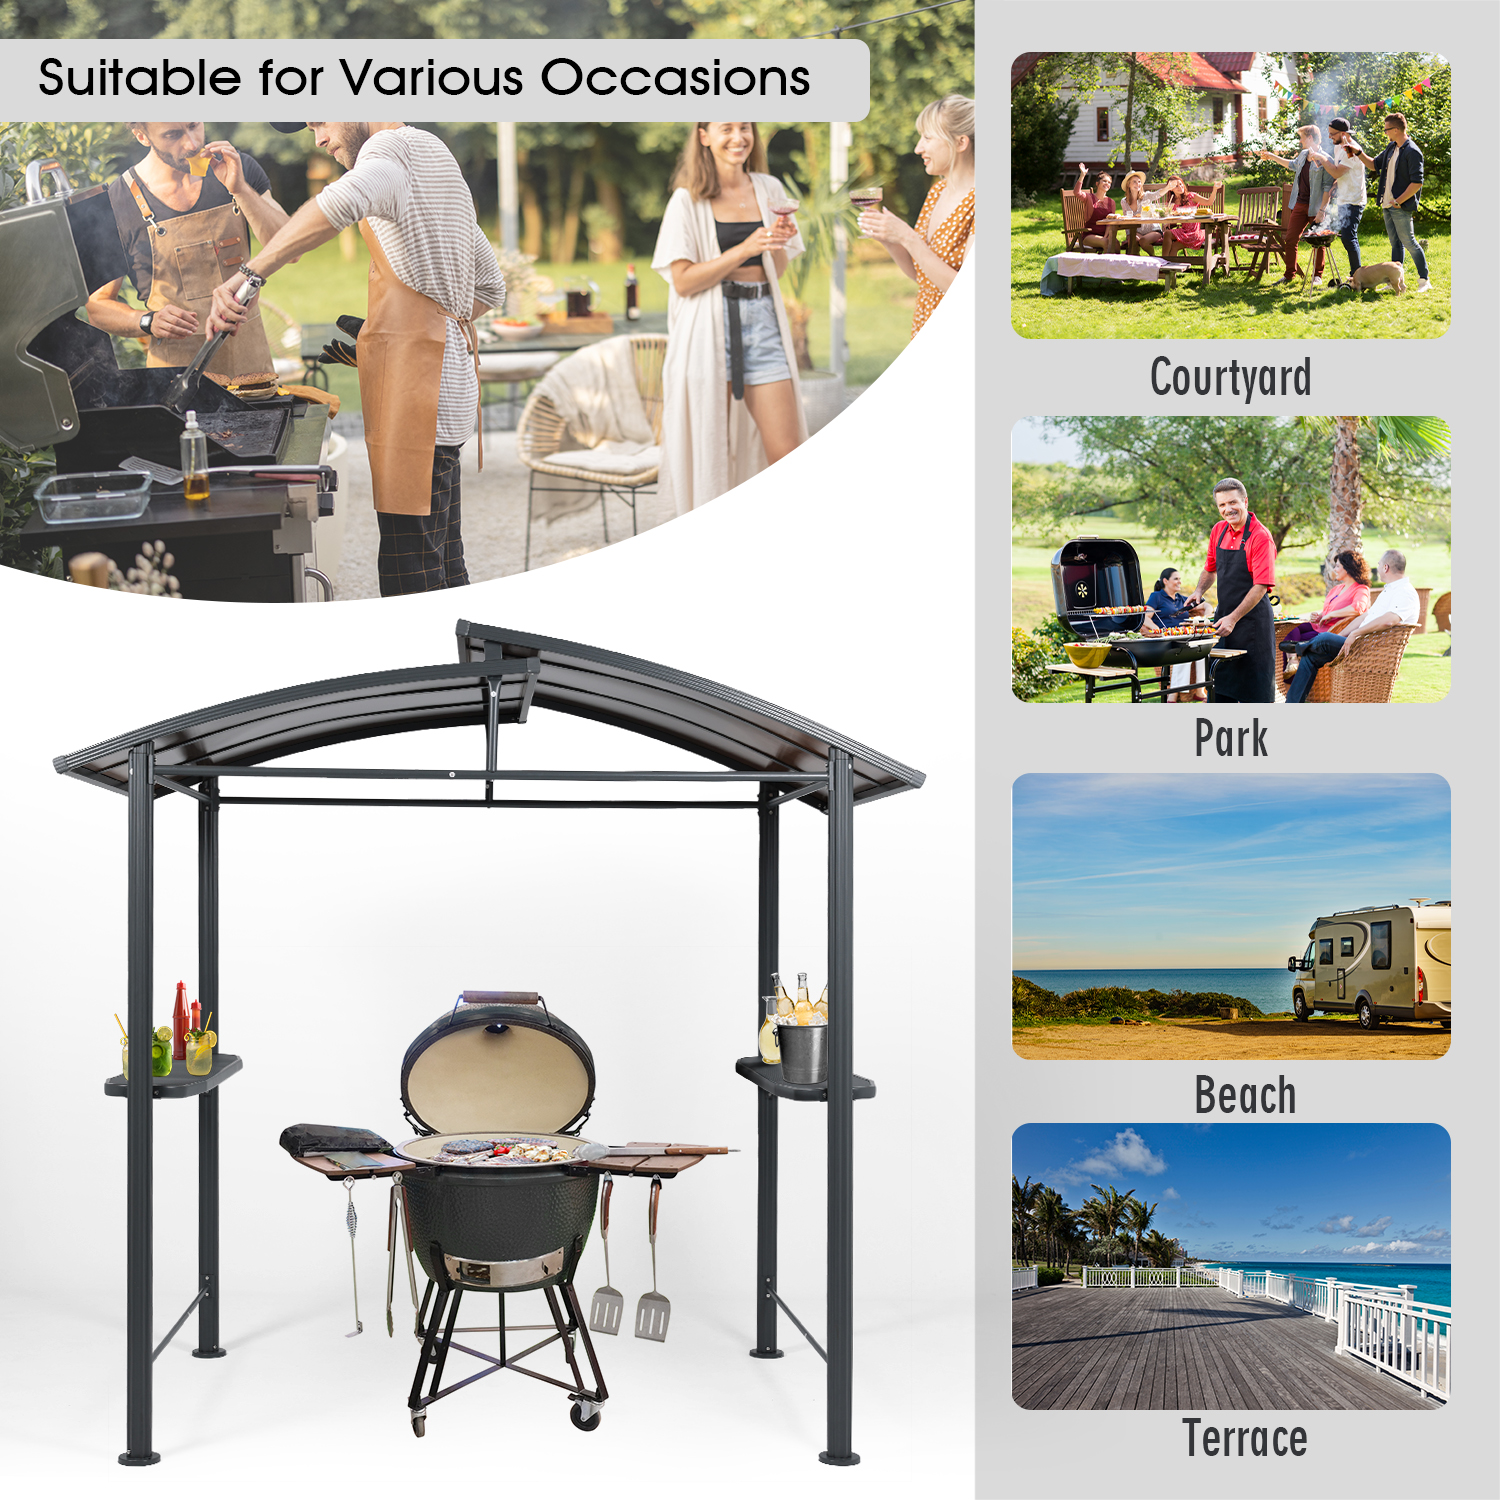 Aoodor 8 x 5 ft. BBQ Grill Gazebo Shelter, Gray Steel Frame with Side Shelves,  for Outdoor, Patio, Backyard - image 4 of 7